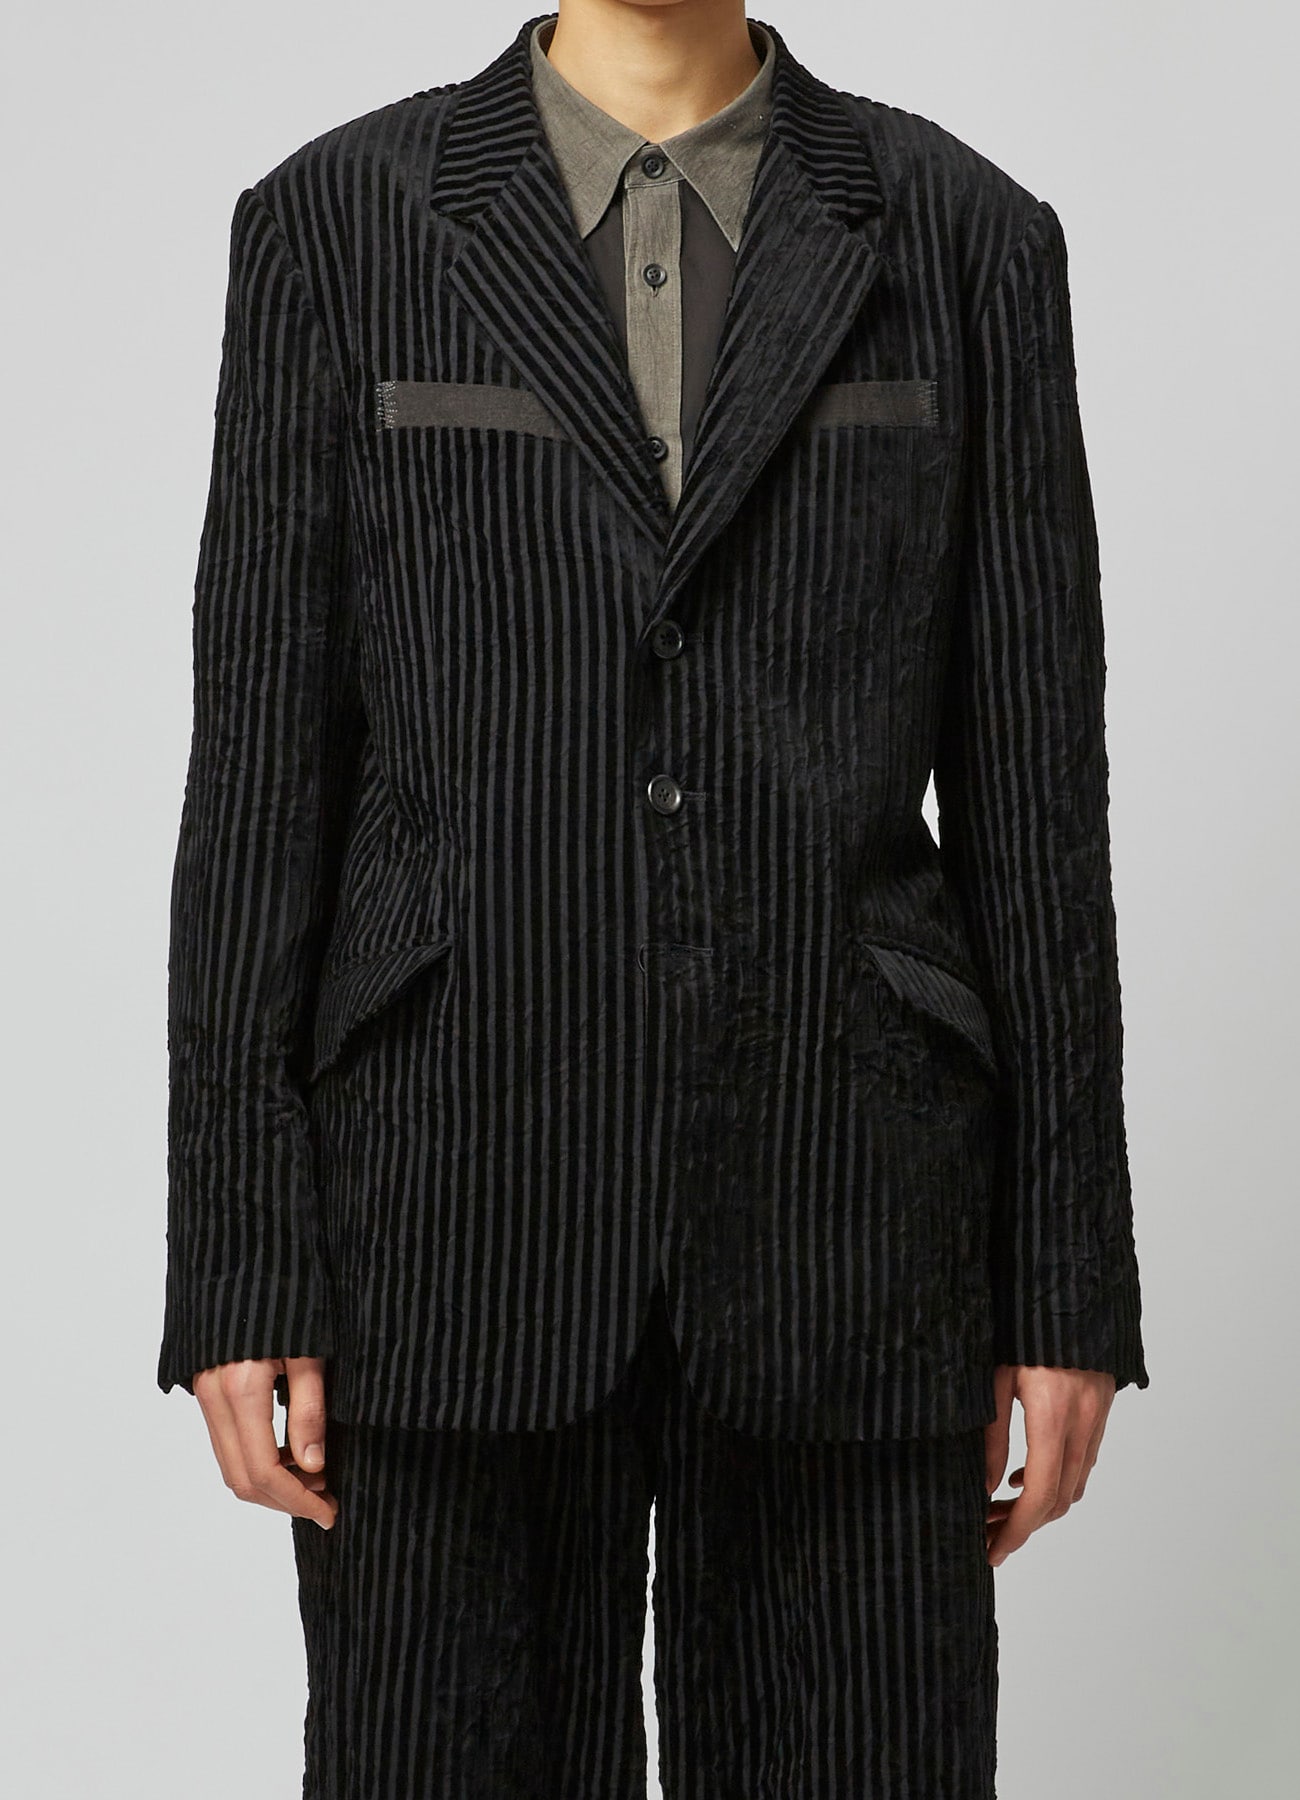 WRINKLED STRIPED 3-BUTTON JACKET WITH PEAK LAPELS